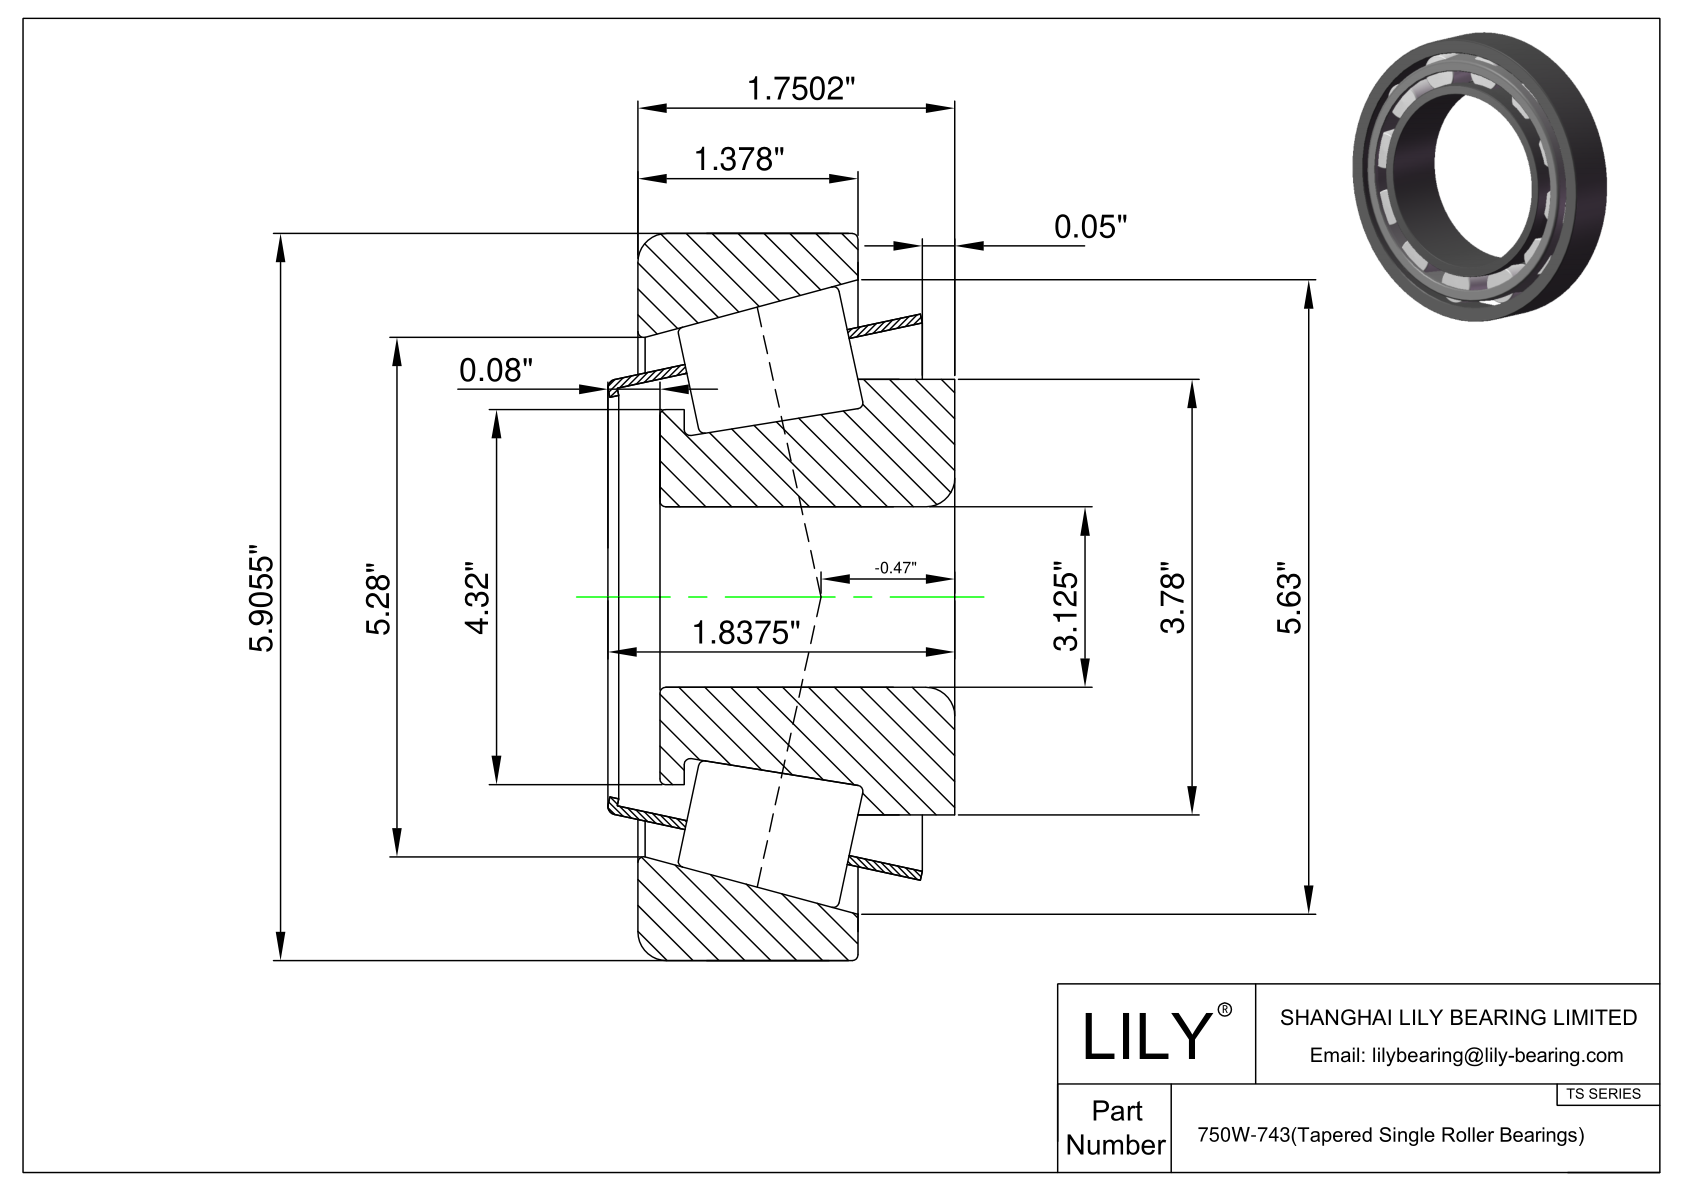 750W-743 TS (Tapered Single Roller Bearings) (Imperial) cad drawing